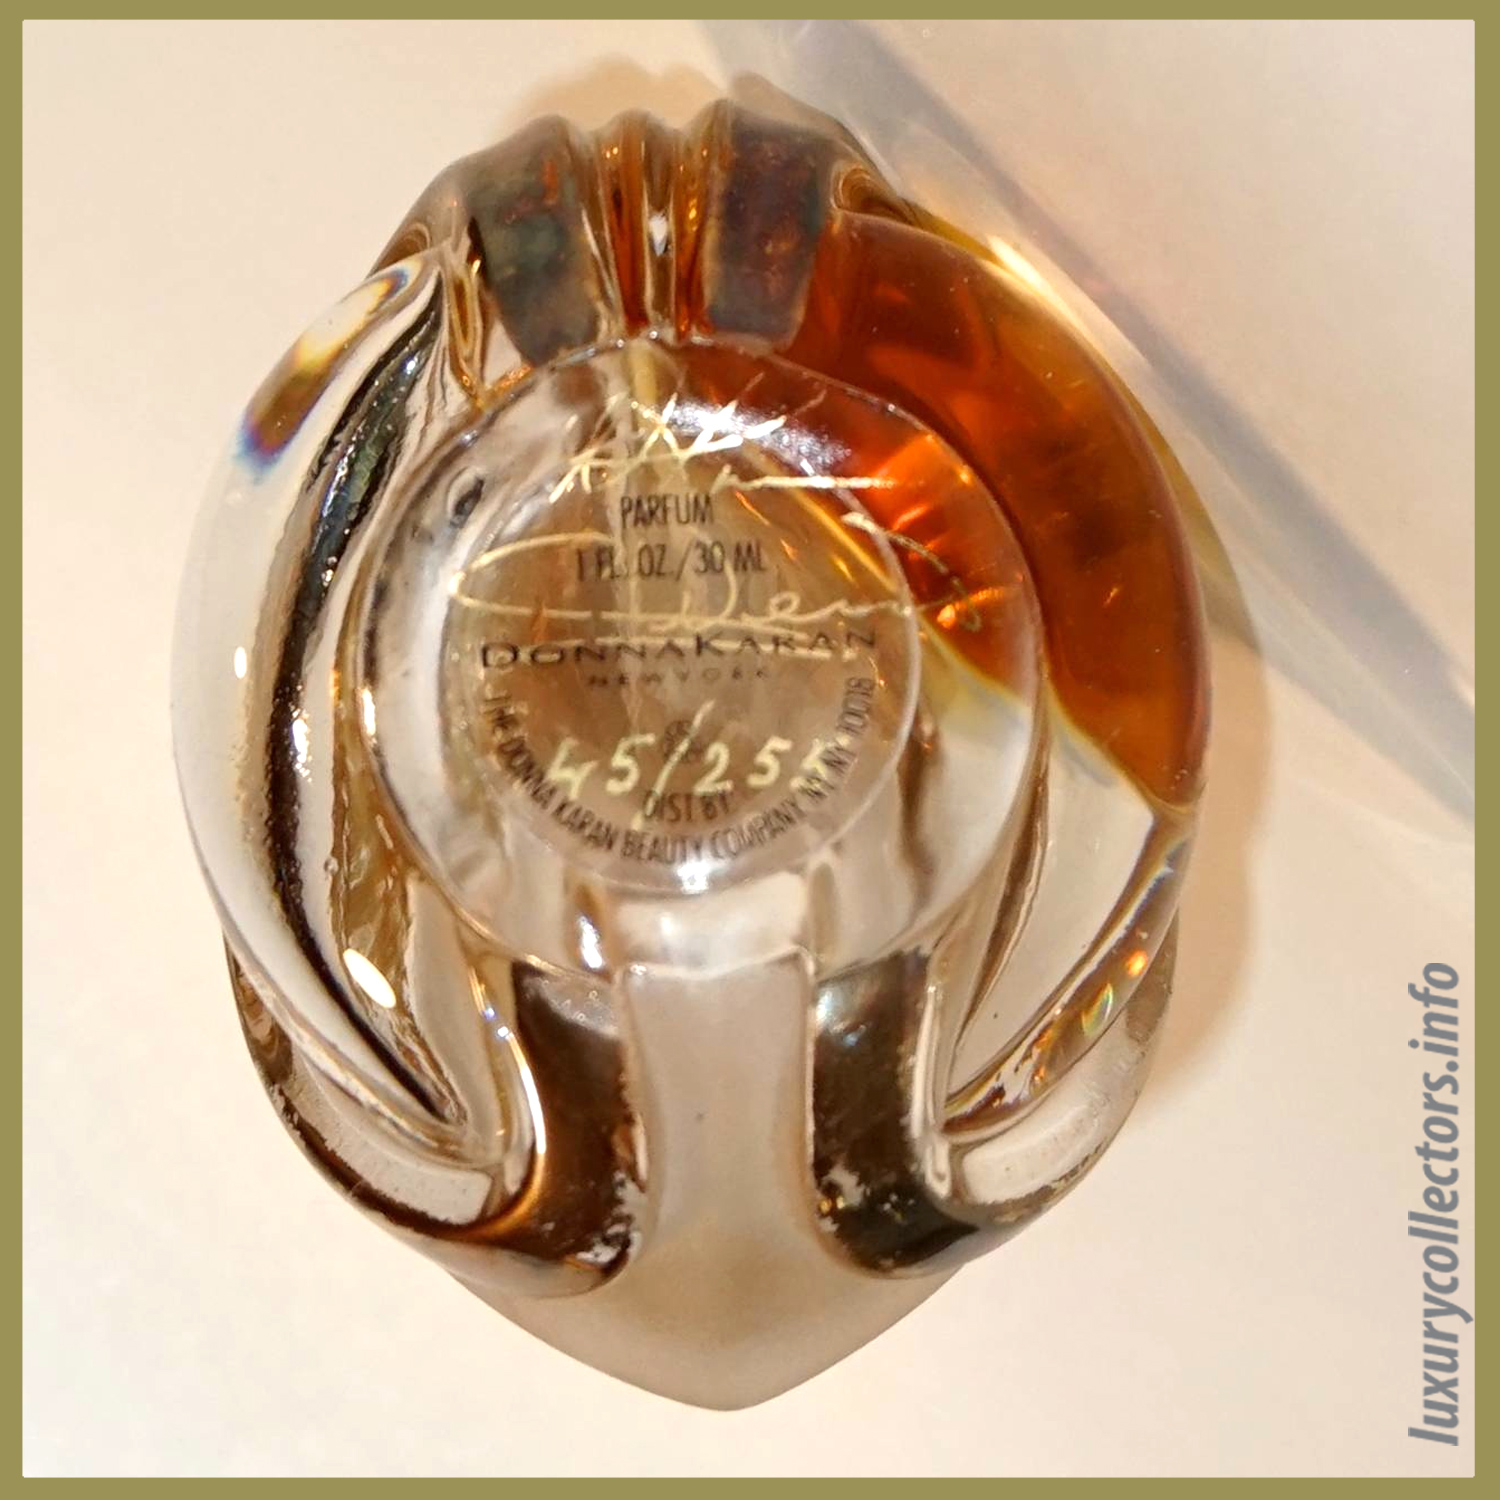 Signatures of Stephan Weiss Numbered Donna Karan New York Parfum Limited Edition Perfume Bottle Gold Signed 